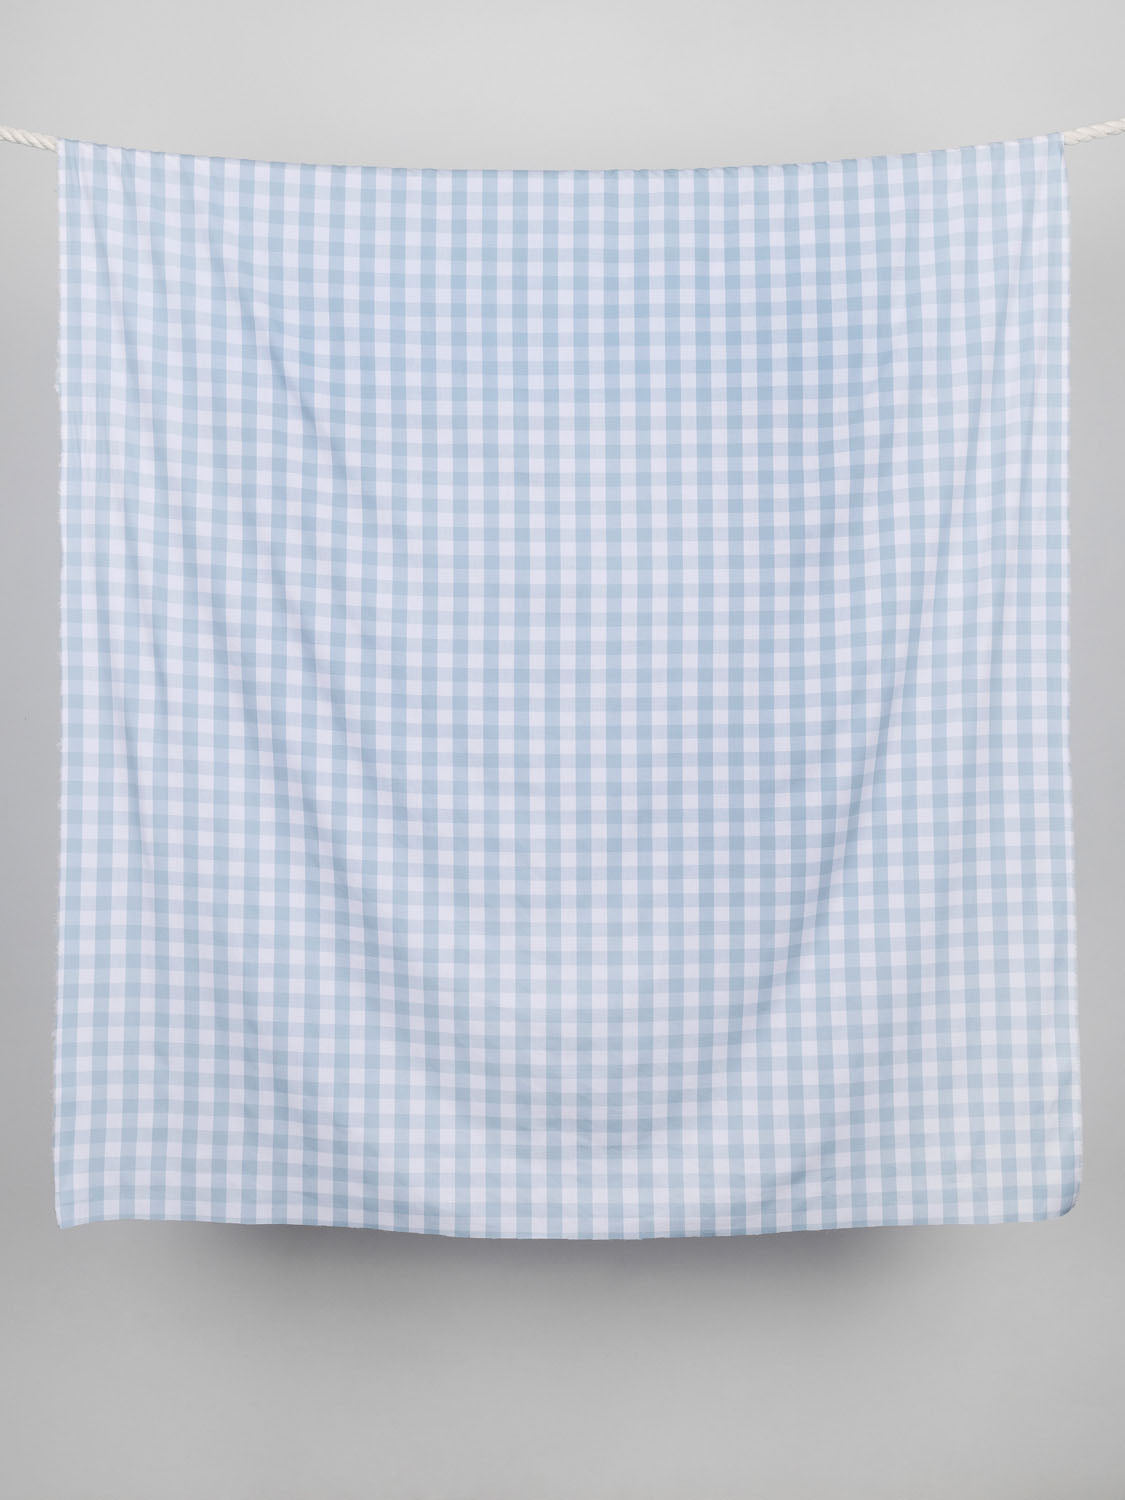 Large Scale Yarn-Dyed Gingham Cotton - River Blue + White | Core Fabrics